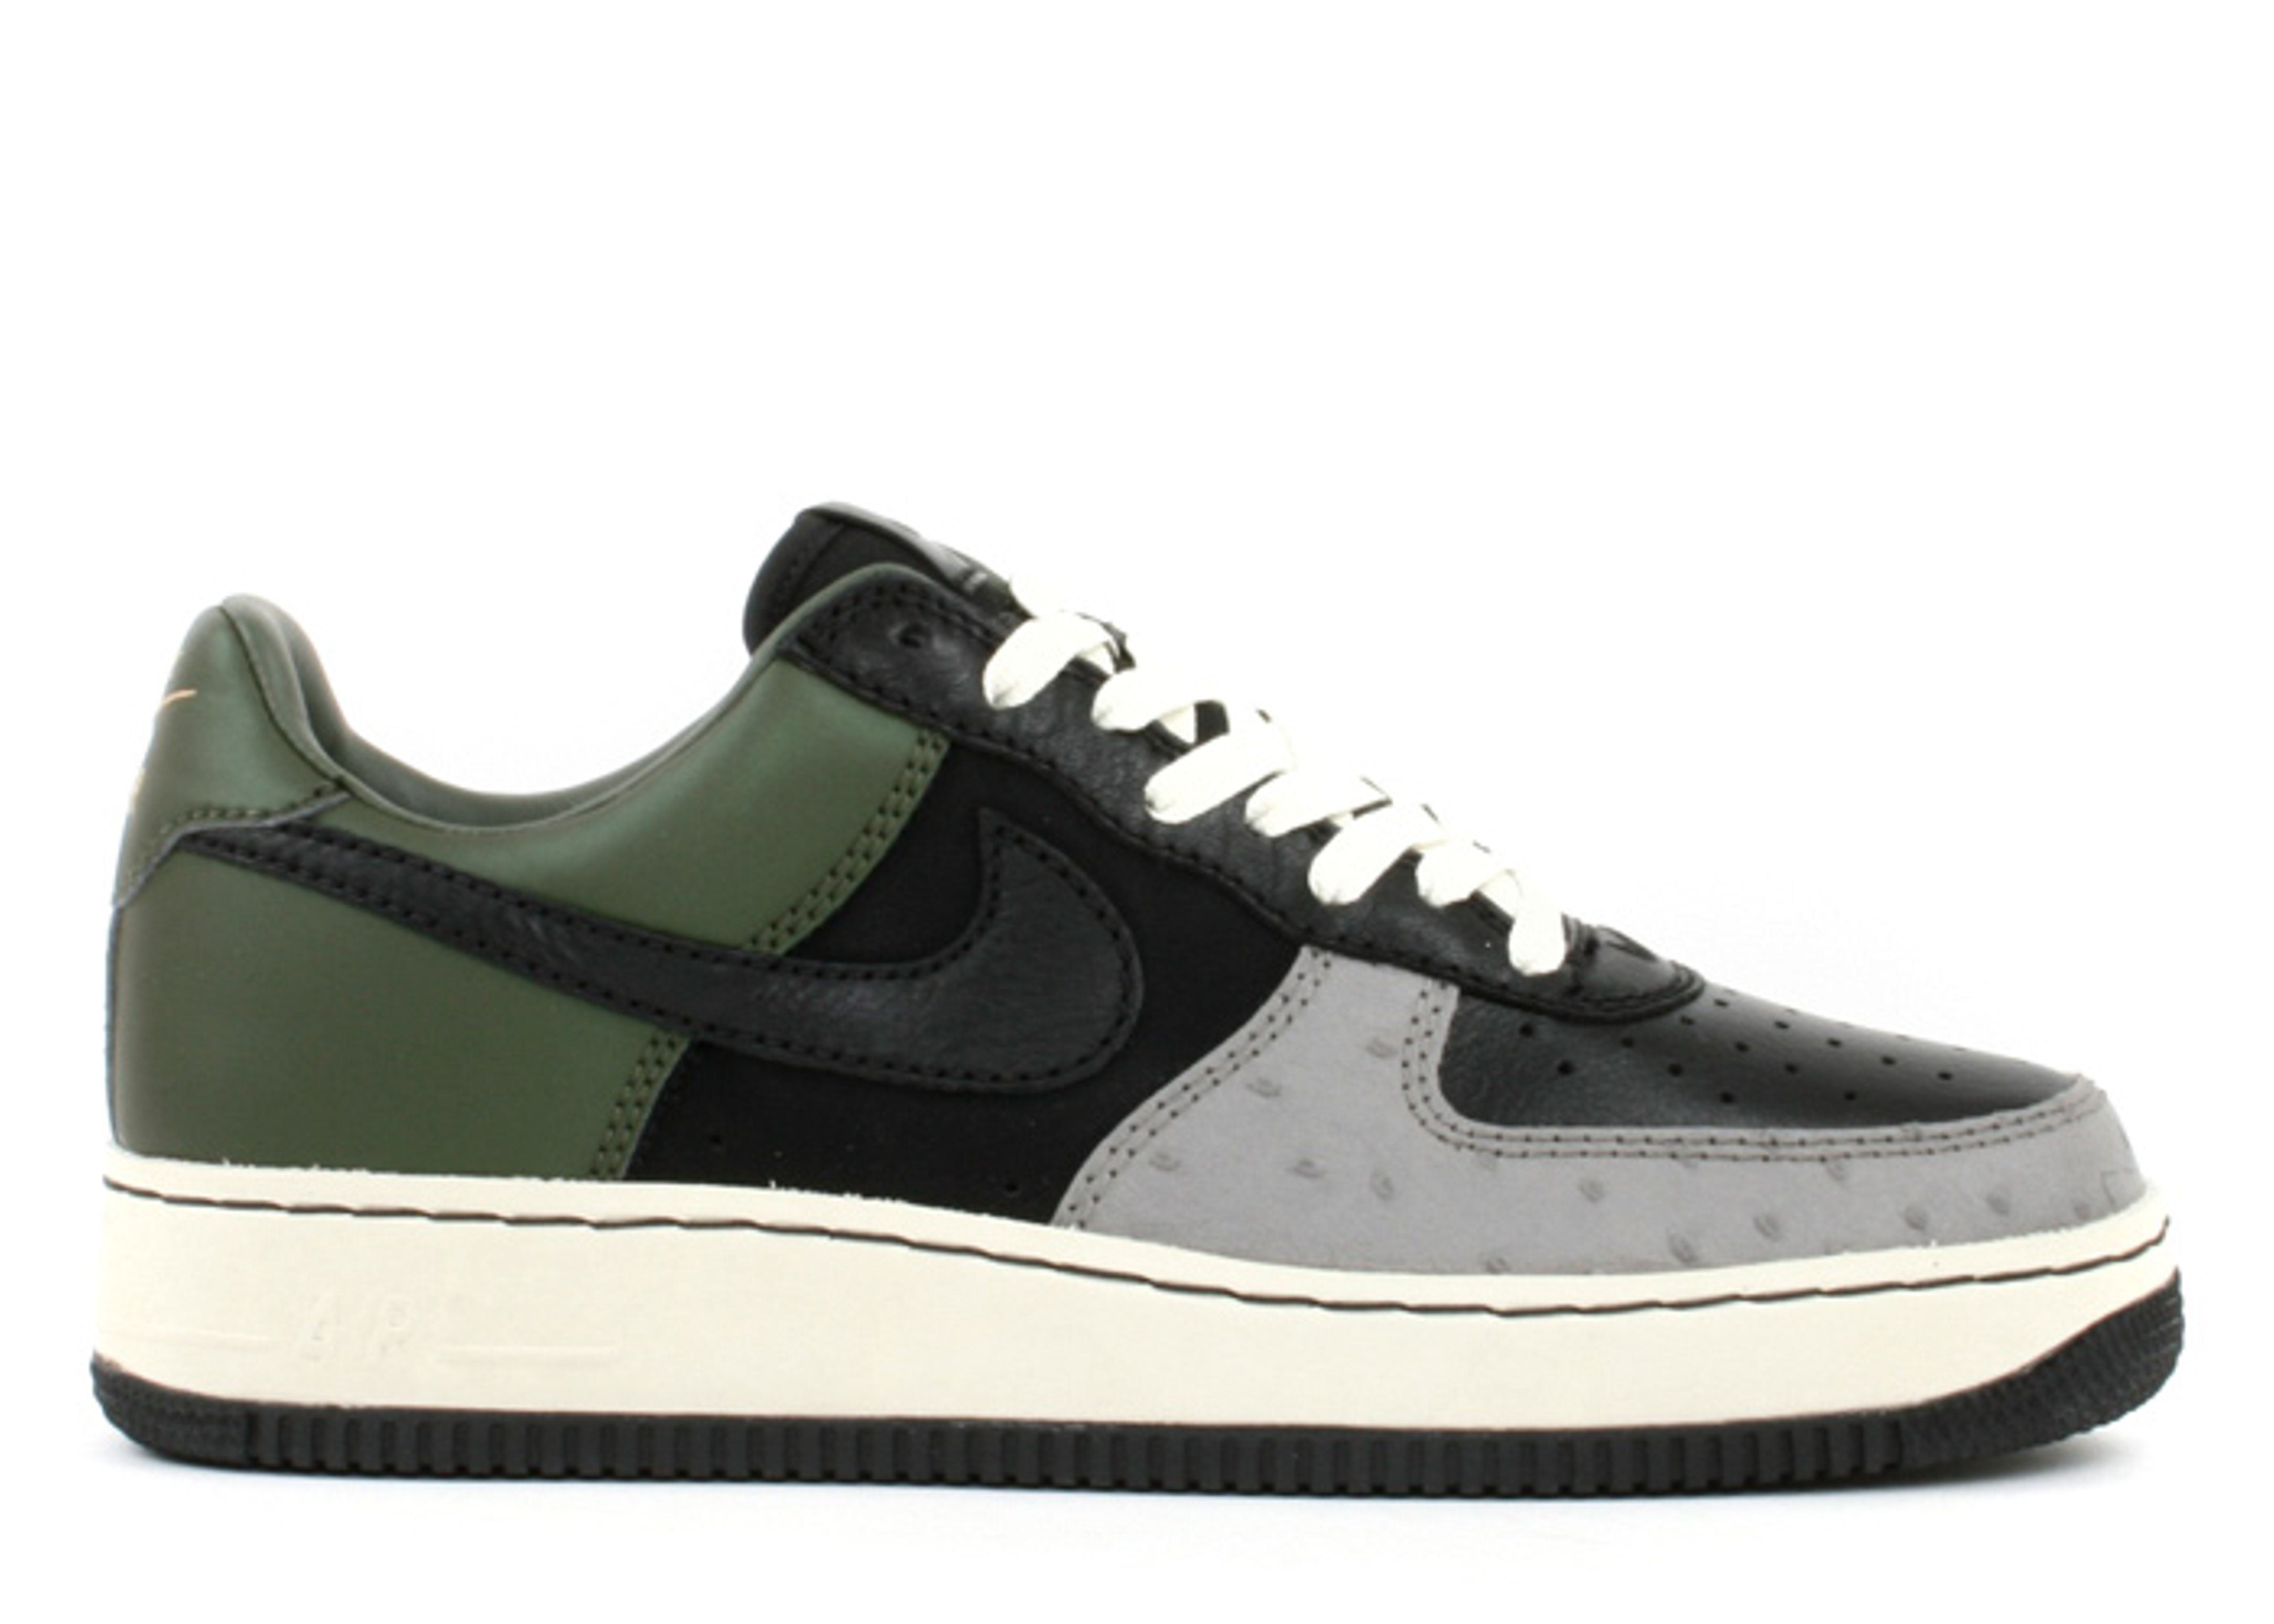 Air Force 1 Low 'Inside Out' - Nike - 312486 001 - black/black